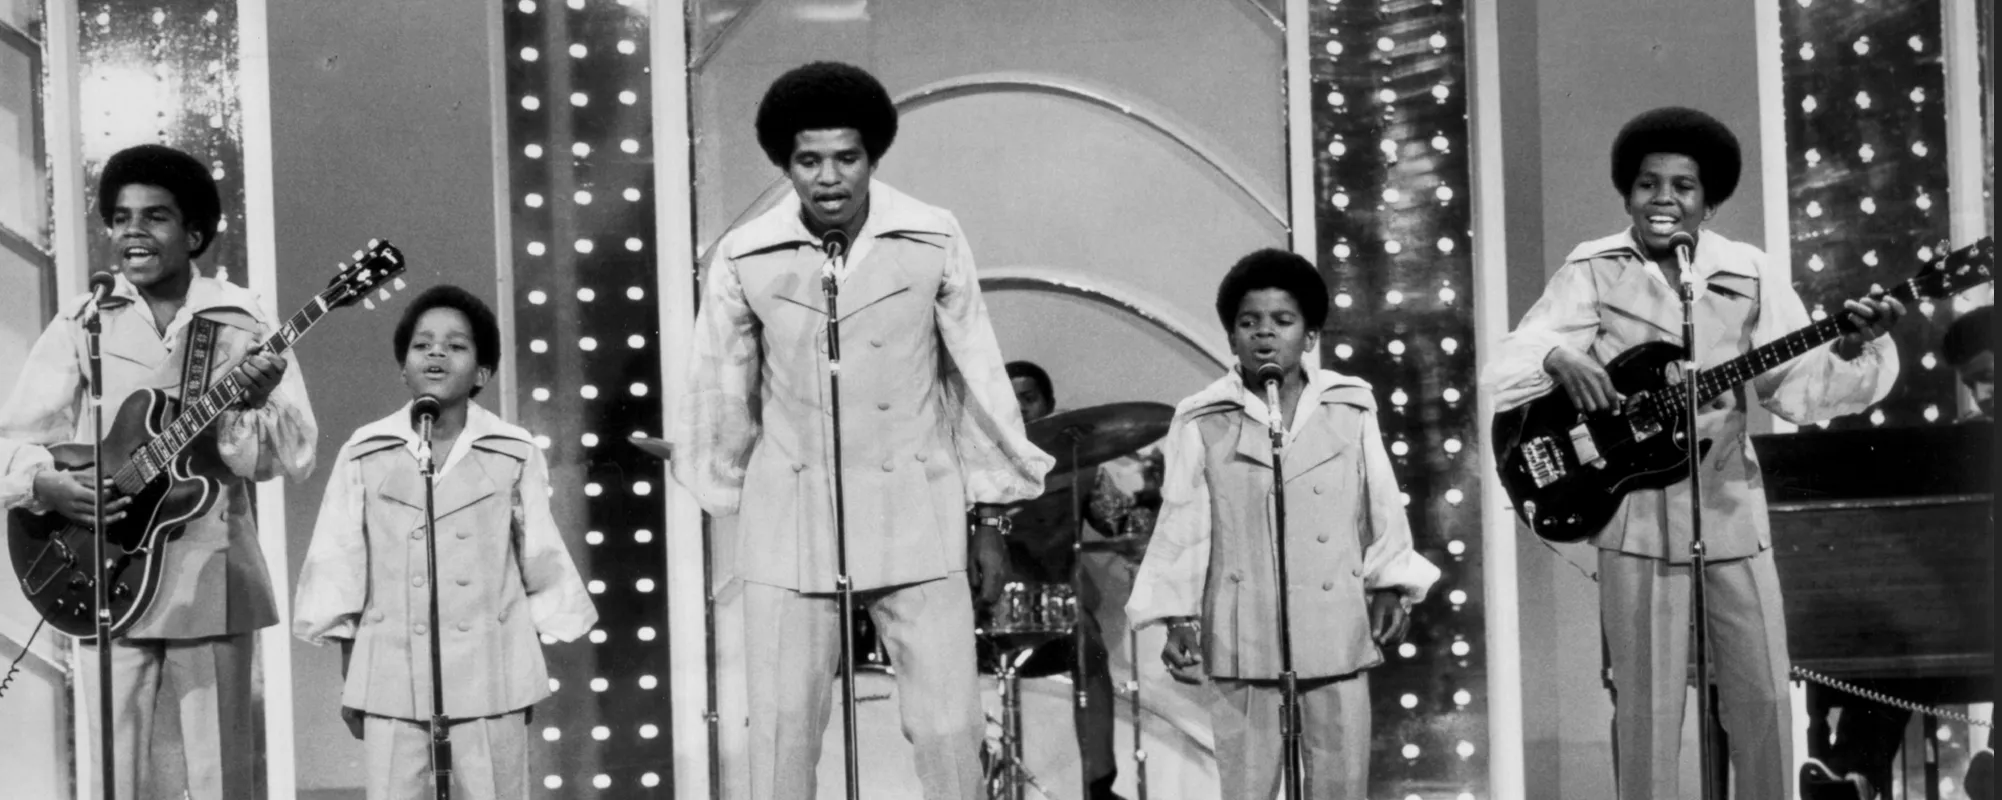 On This Day in Music History: Jackson 5 Make First Appearance on ‘Ed Sullivan Show’